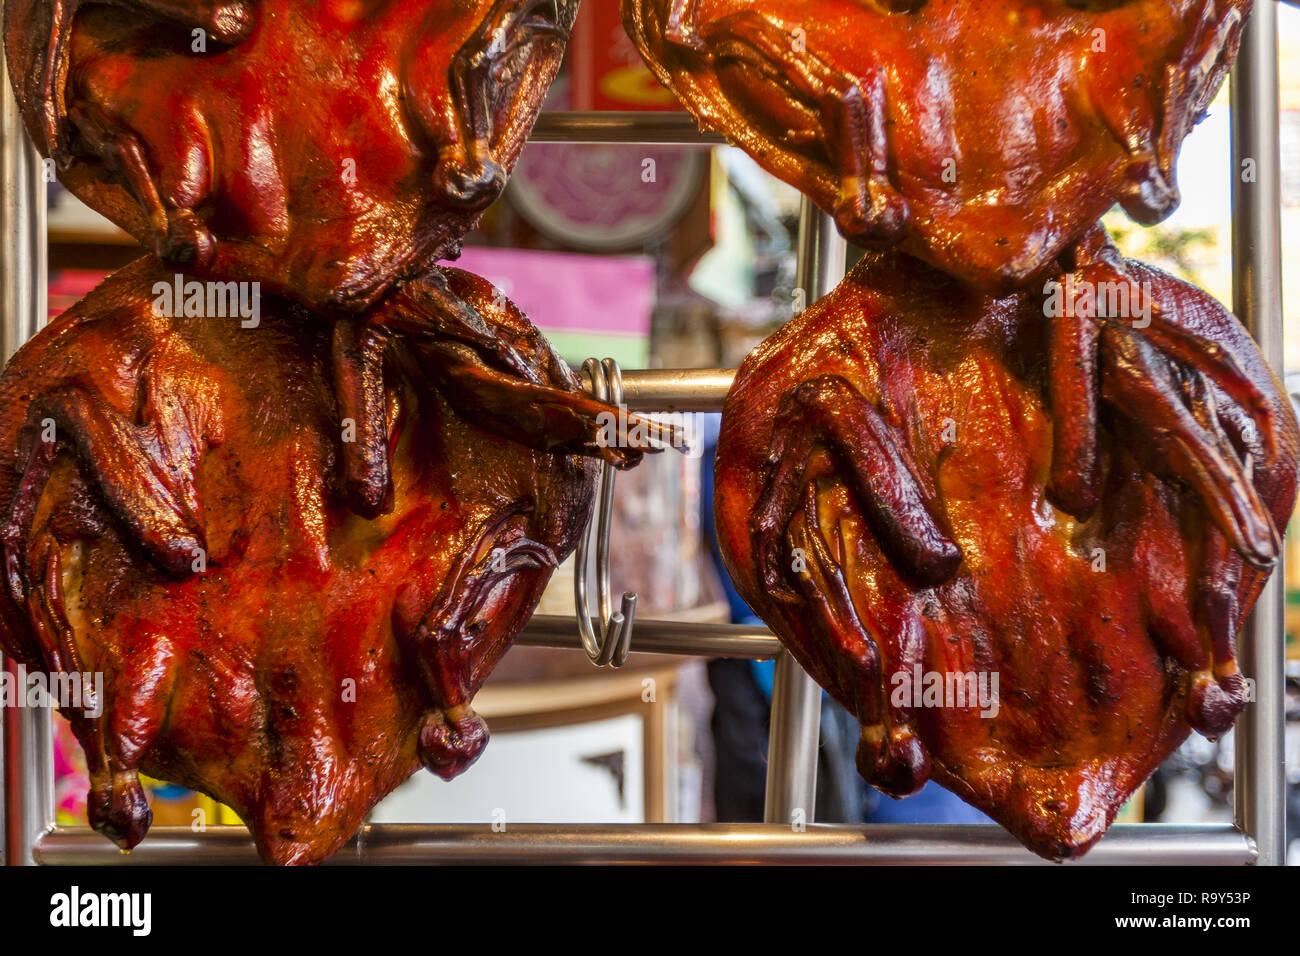 Hanging duck in the window in Bangkok’s Chinatown. Stock Photo